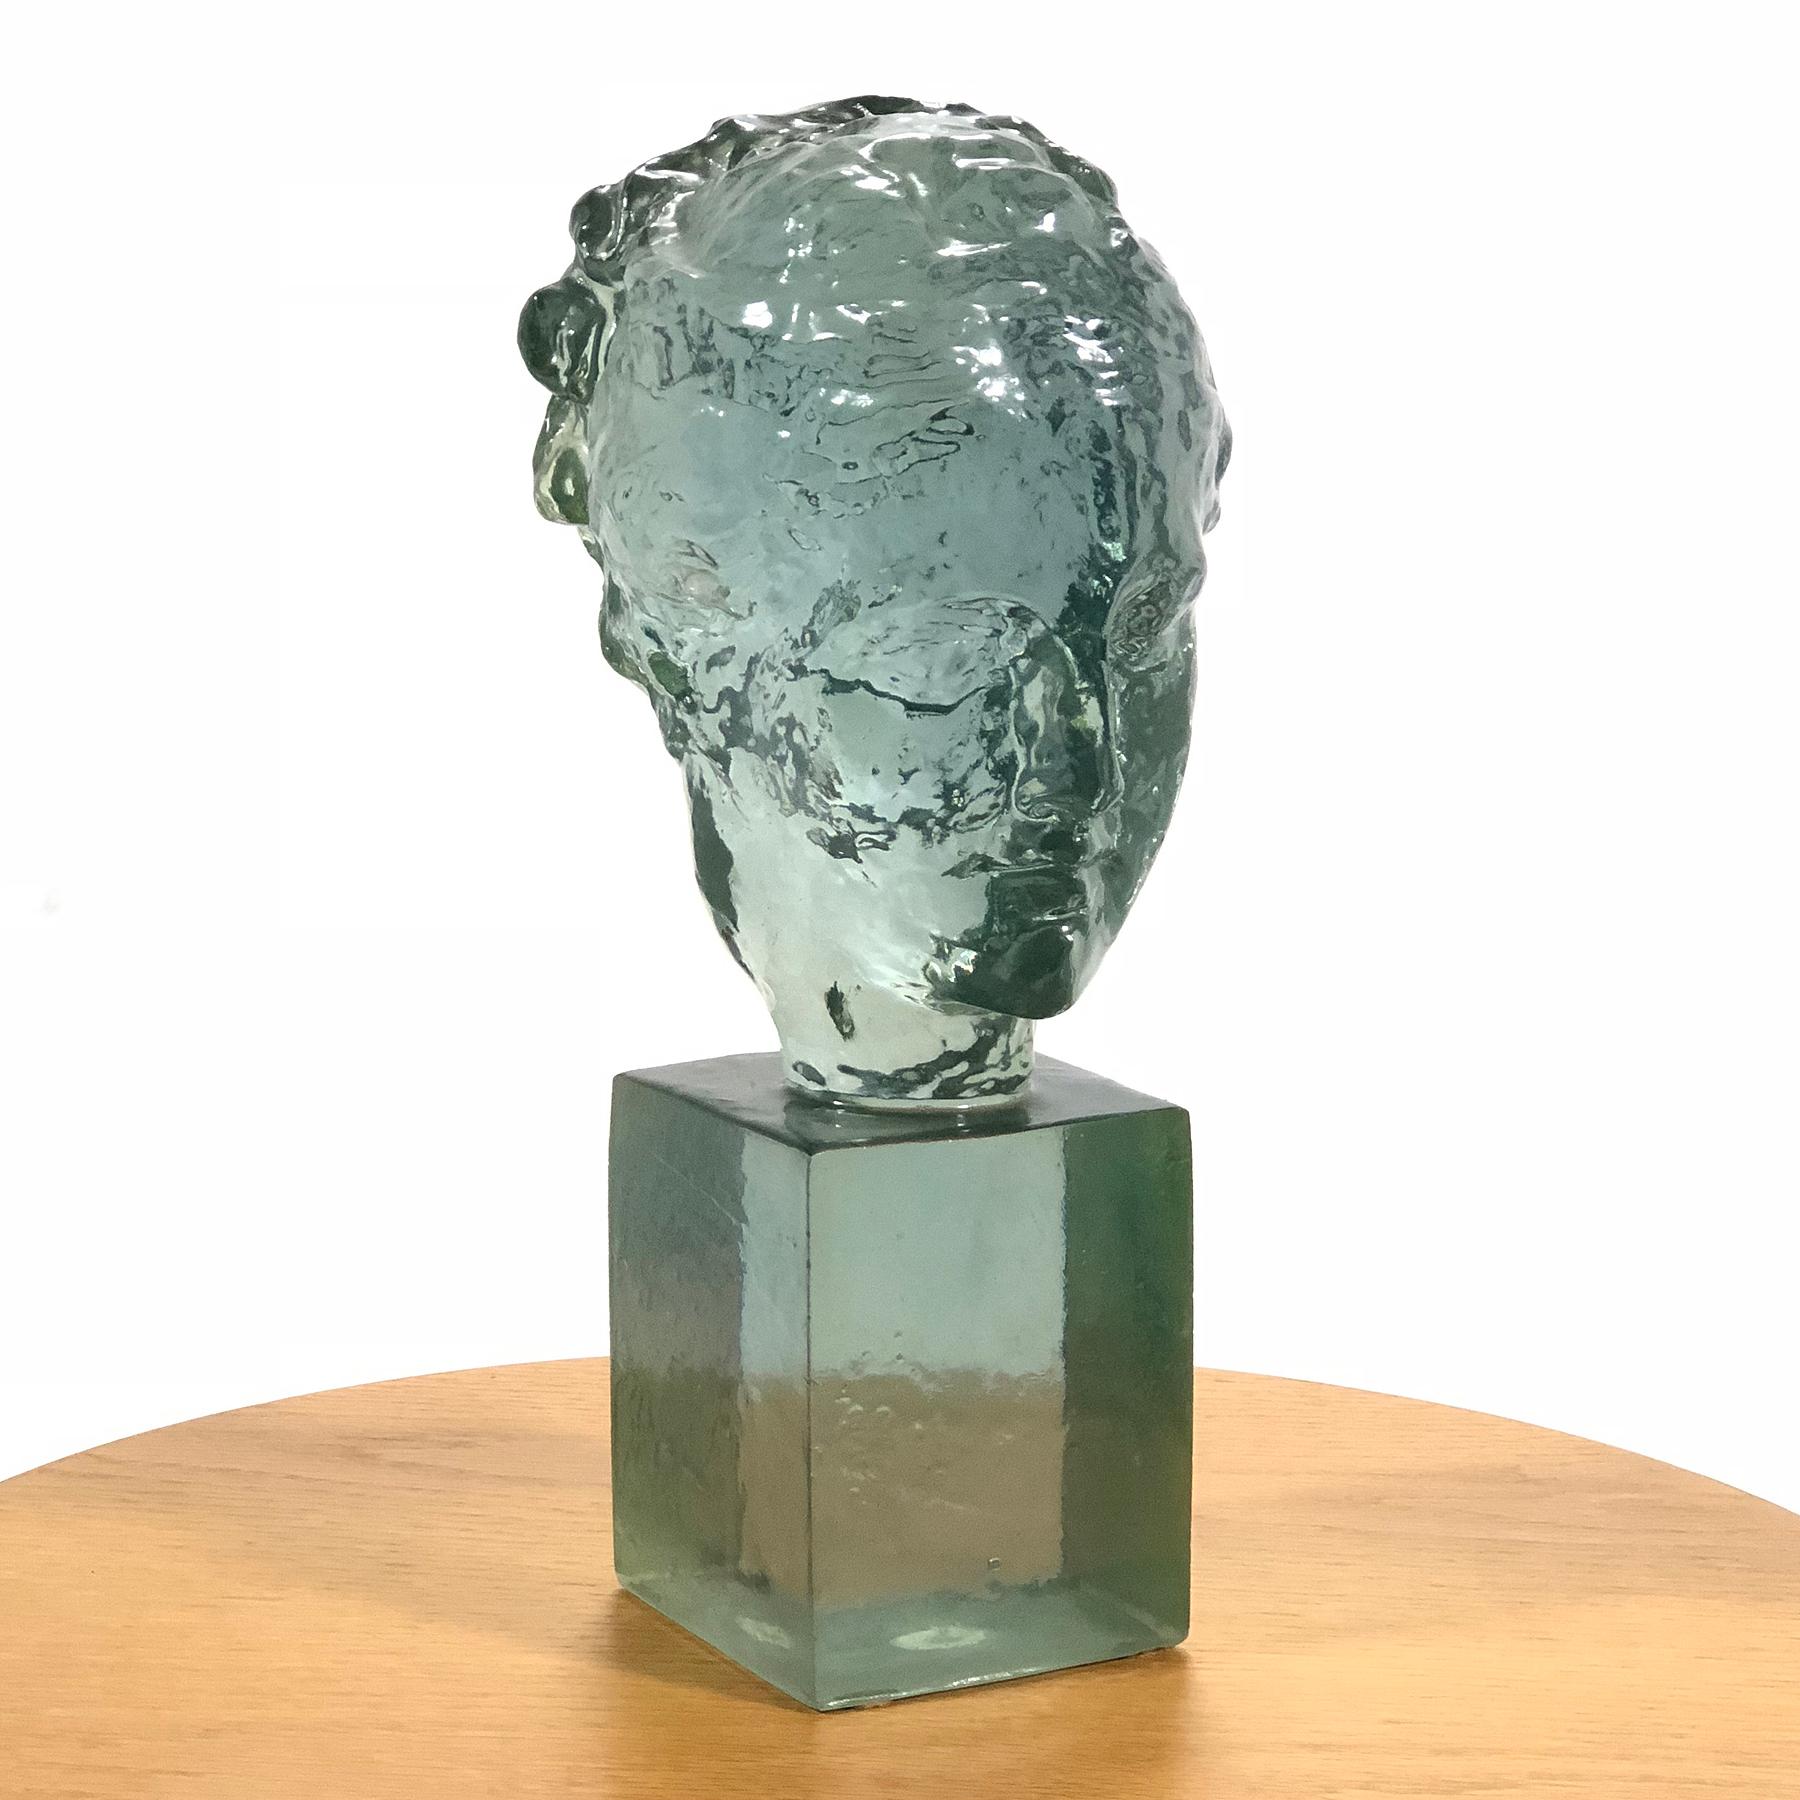 This lovely cast acrylic sculpture of a woman by Dorothy Thorpe has delicate details and a light, luminous quality.